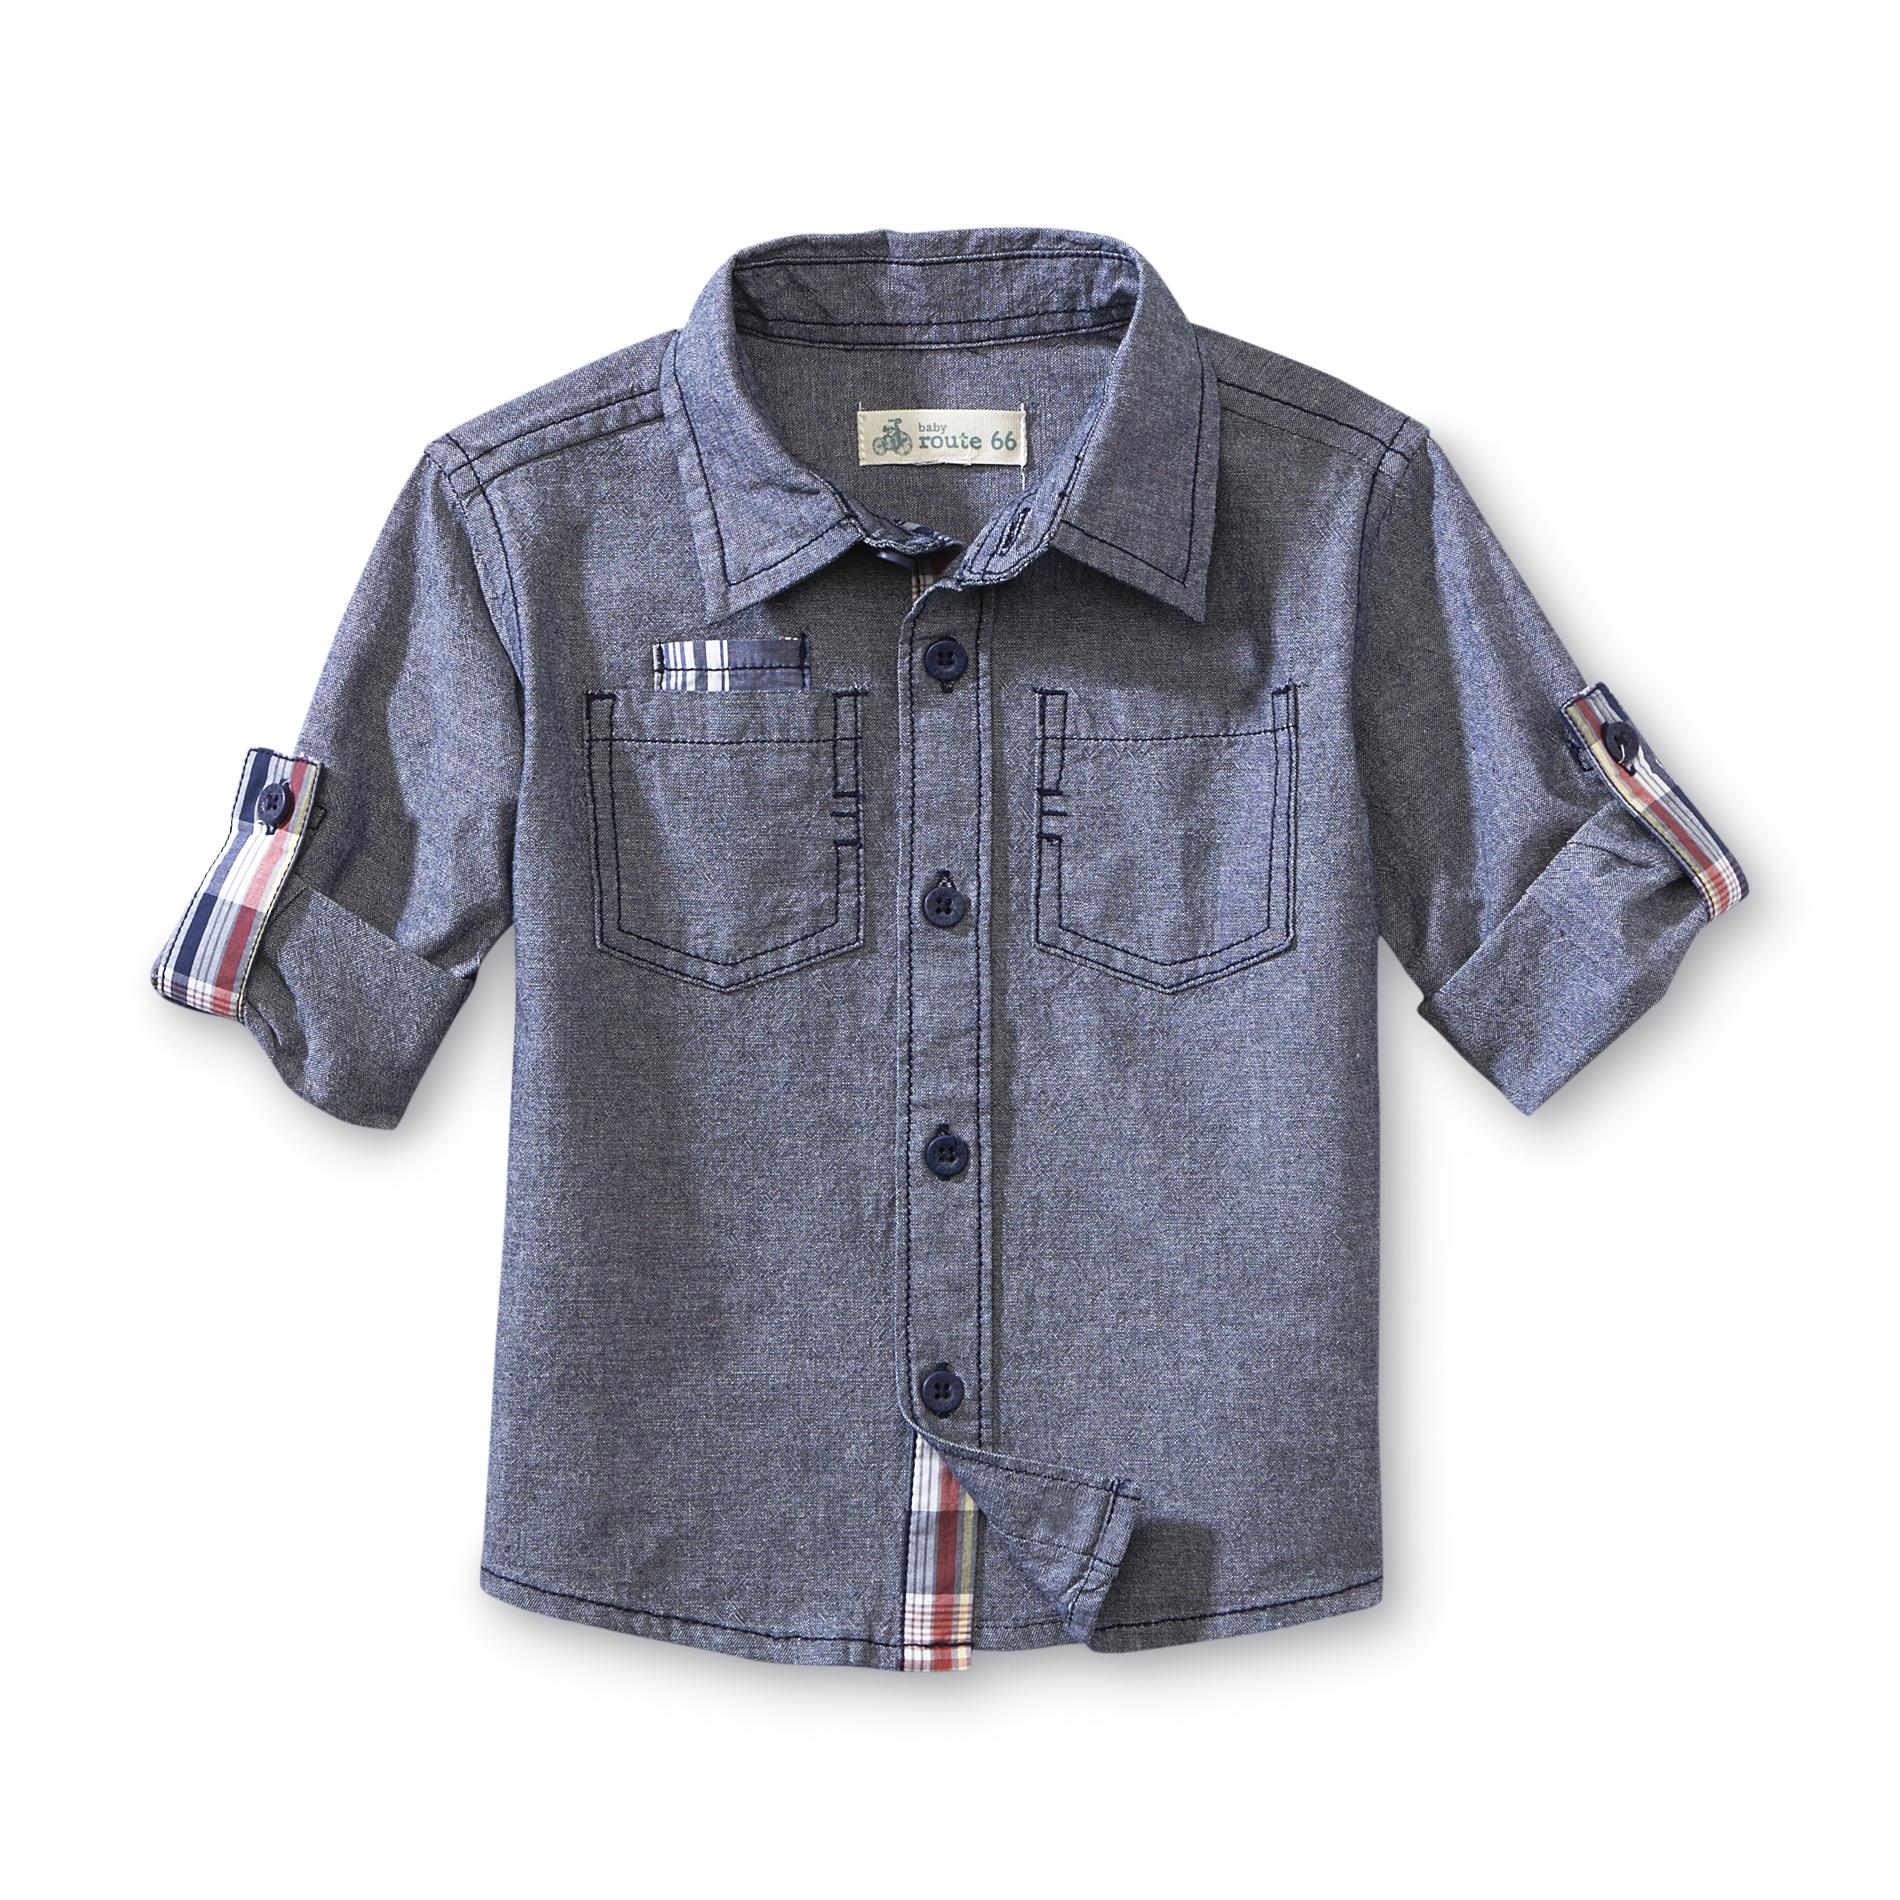 Route 66 Infant & Toddler Boy's Chambray Shirt - Elbow Patch